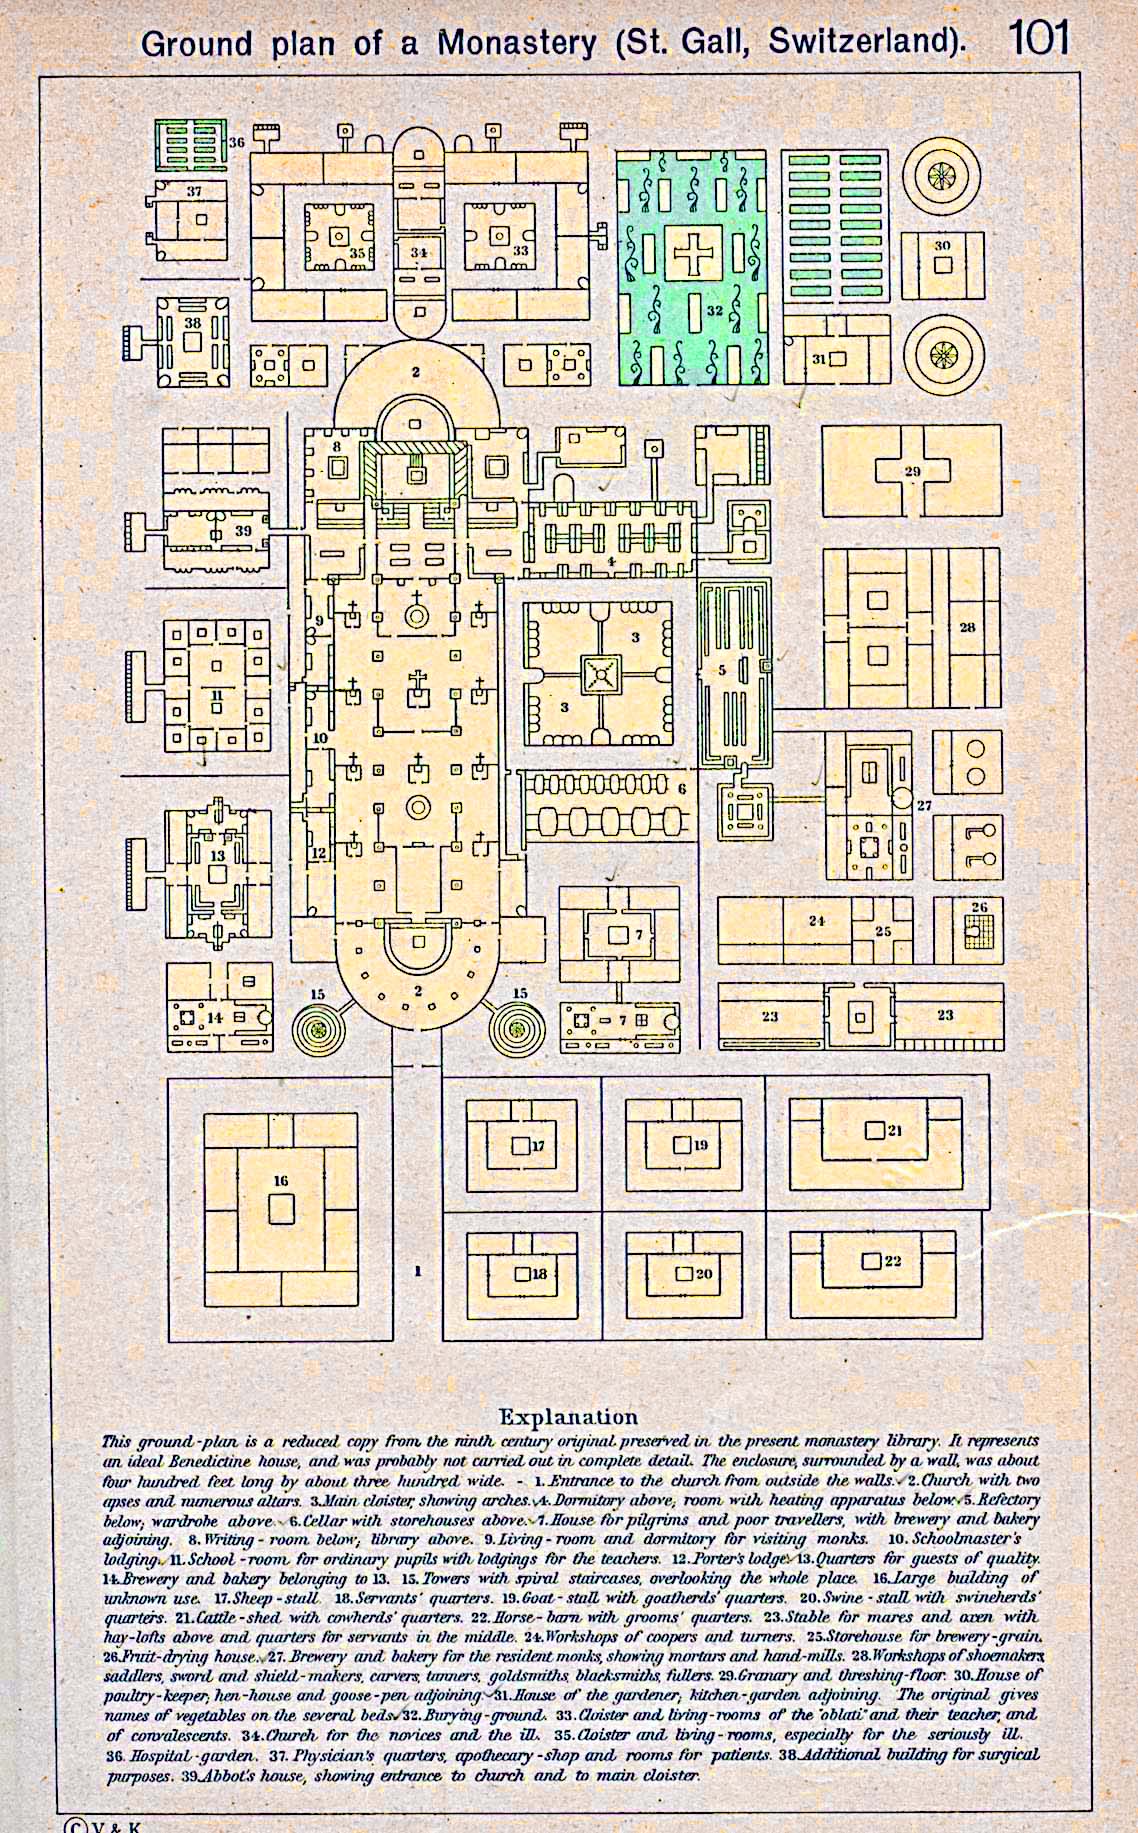 Map of the Ground Plan of St. Gall Monastery, Switzerland; ca. 819-826 A.D.